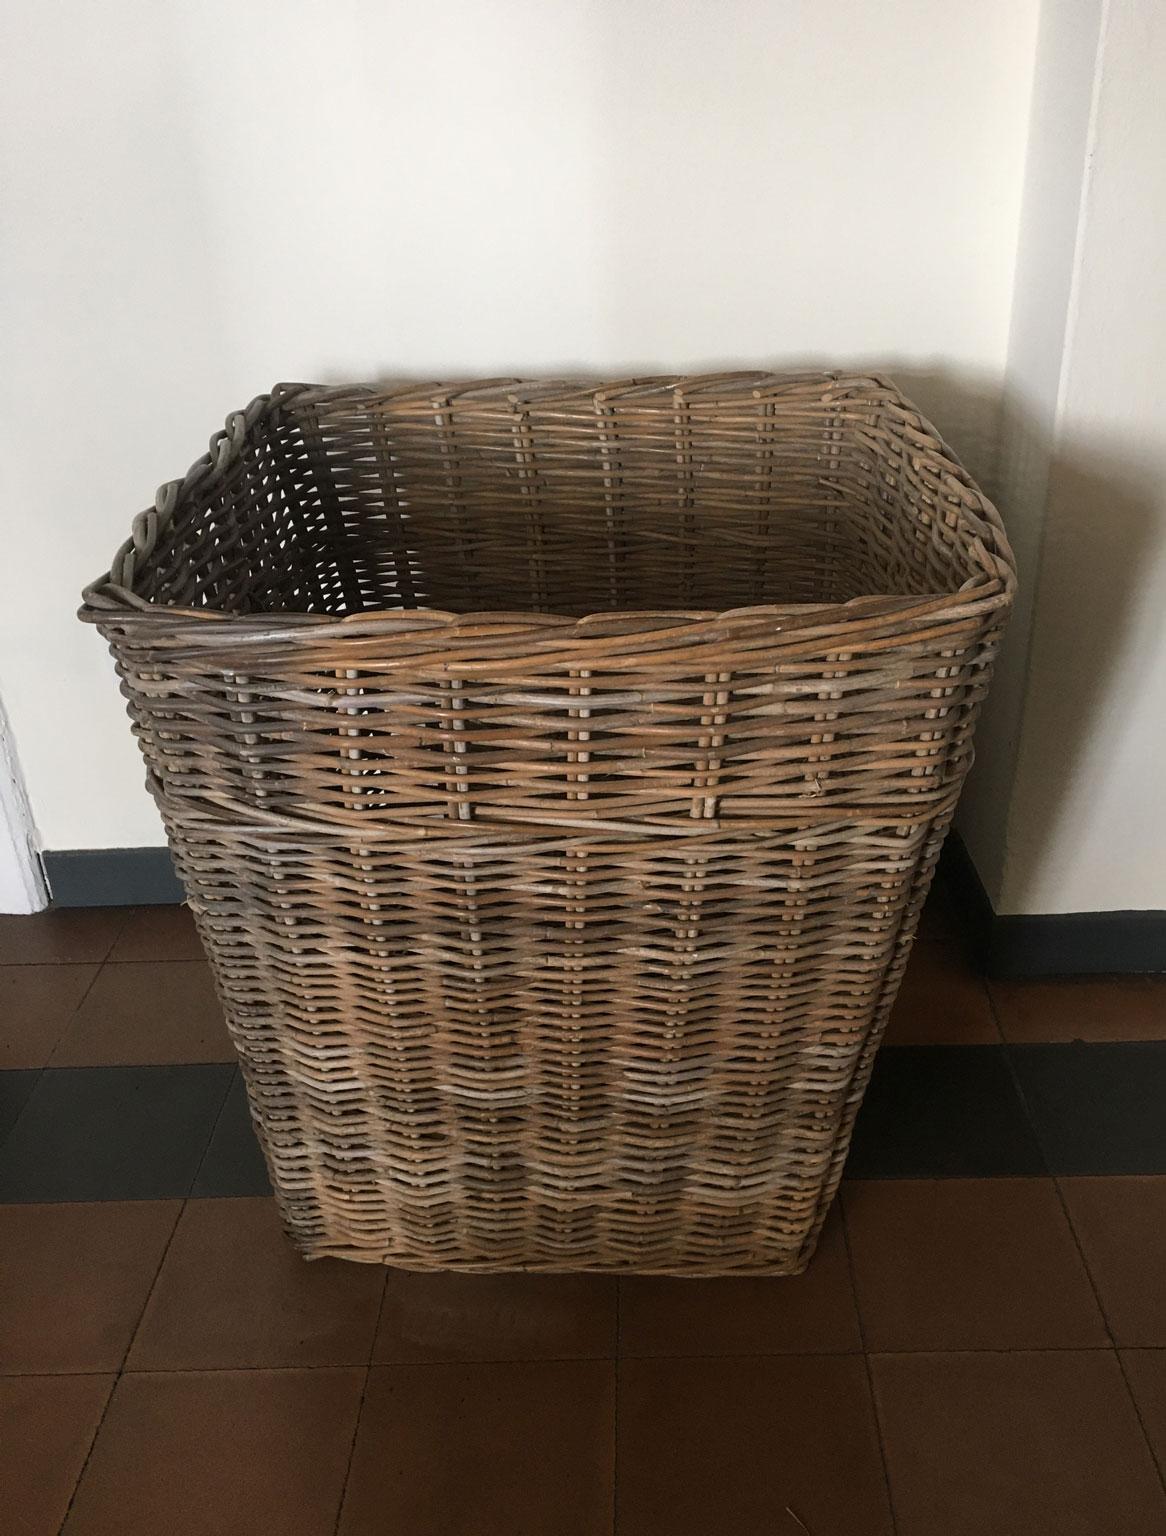 Natural materials and Minimalist style, are the features of this square rattan basket,
useful for planter or fire wood.
Perfect in every kitchen or dining room

We suggest indoor use.